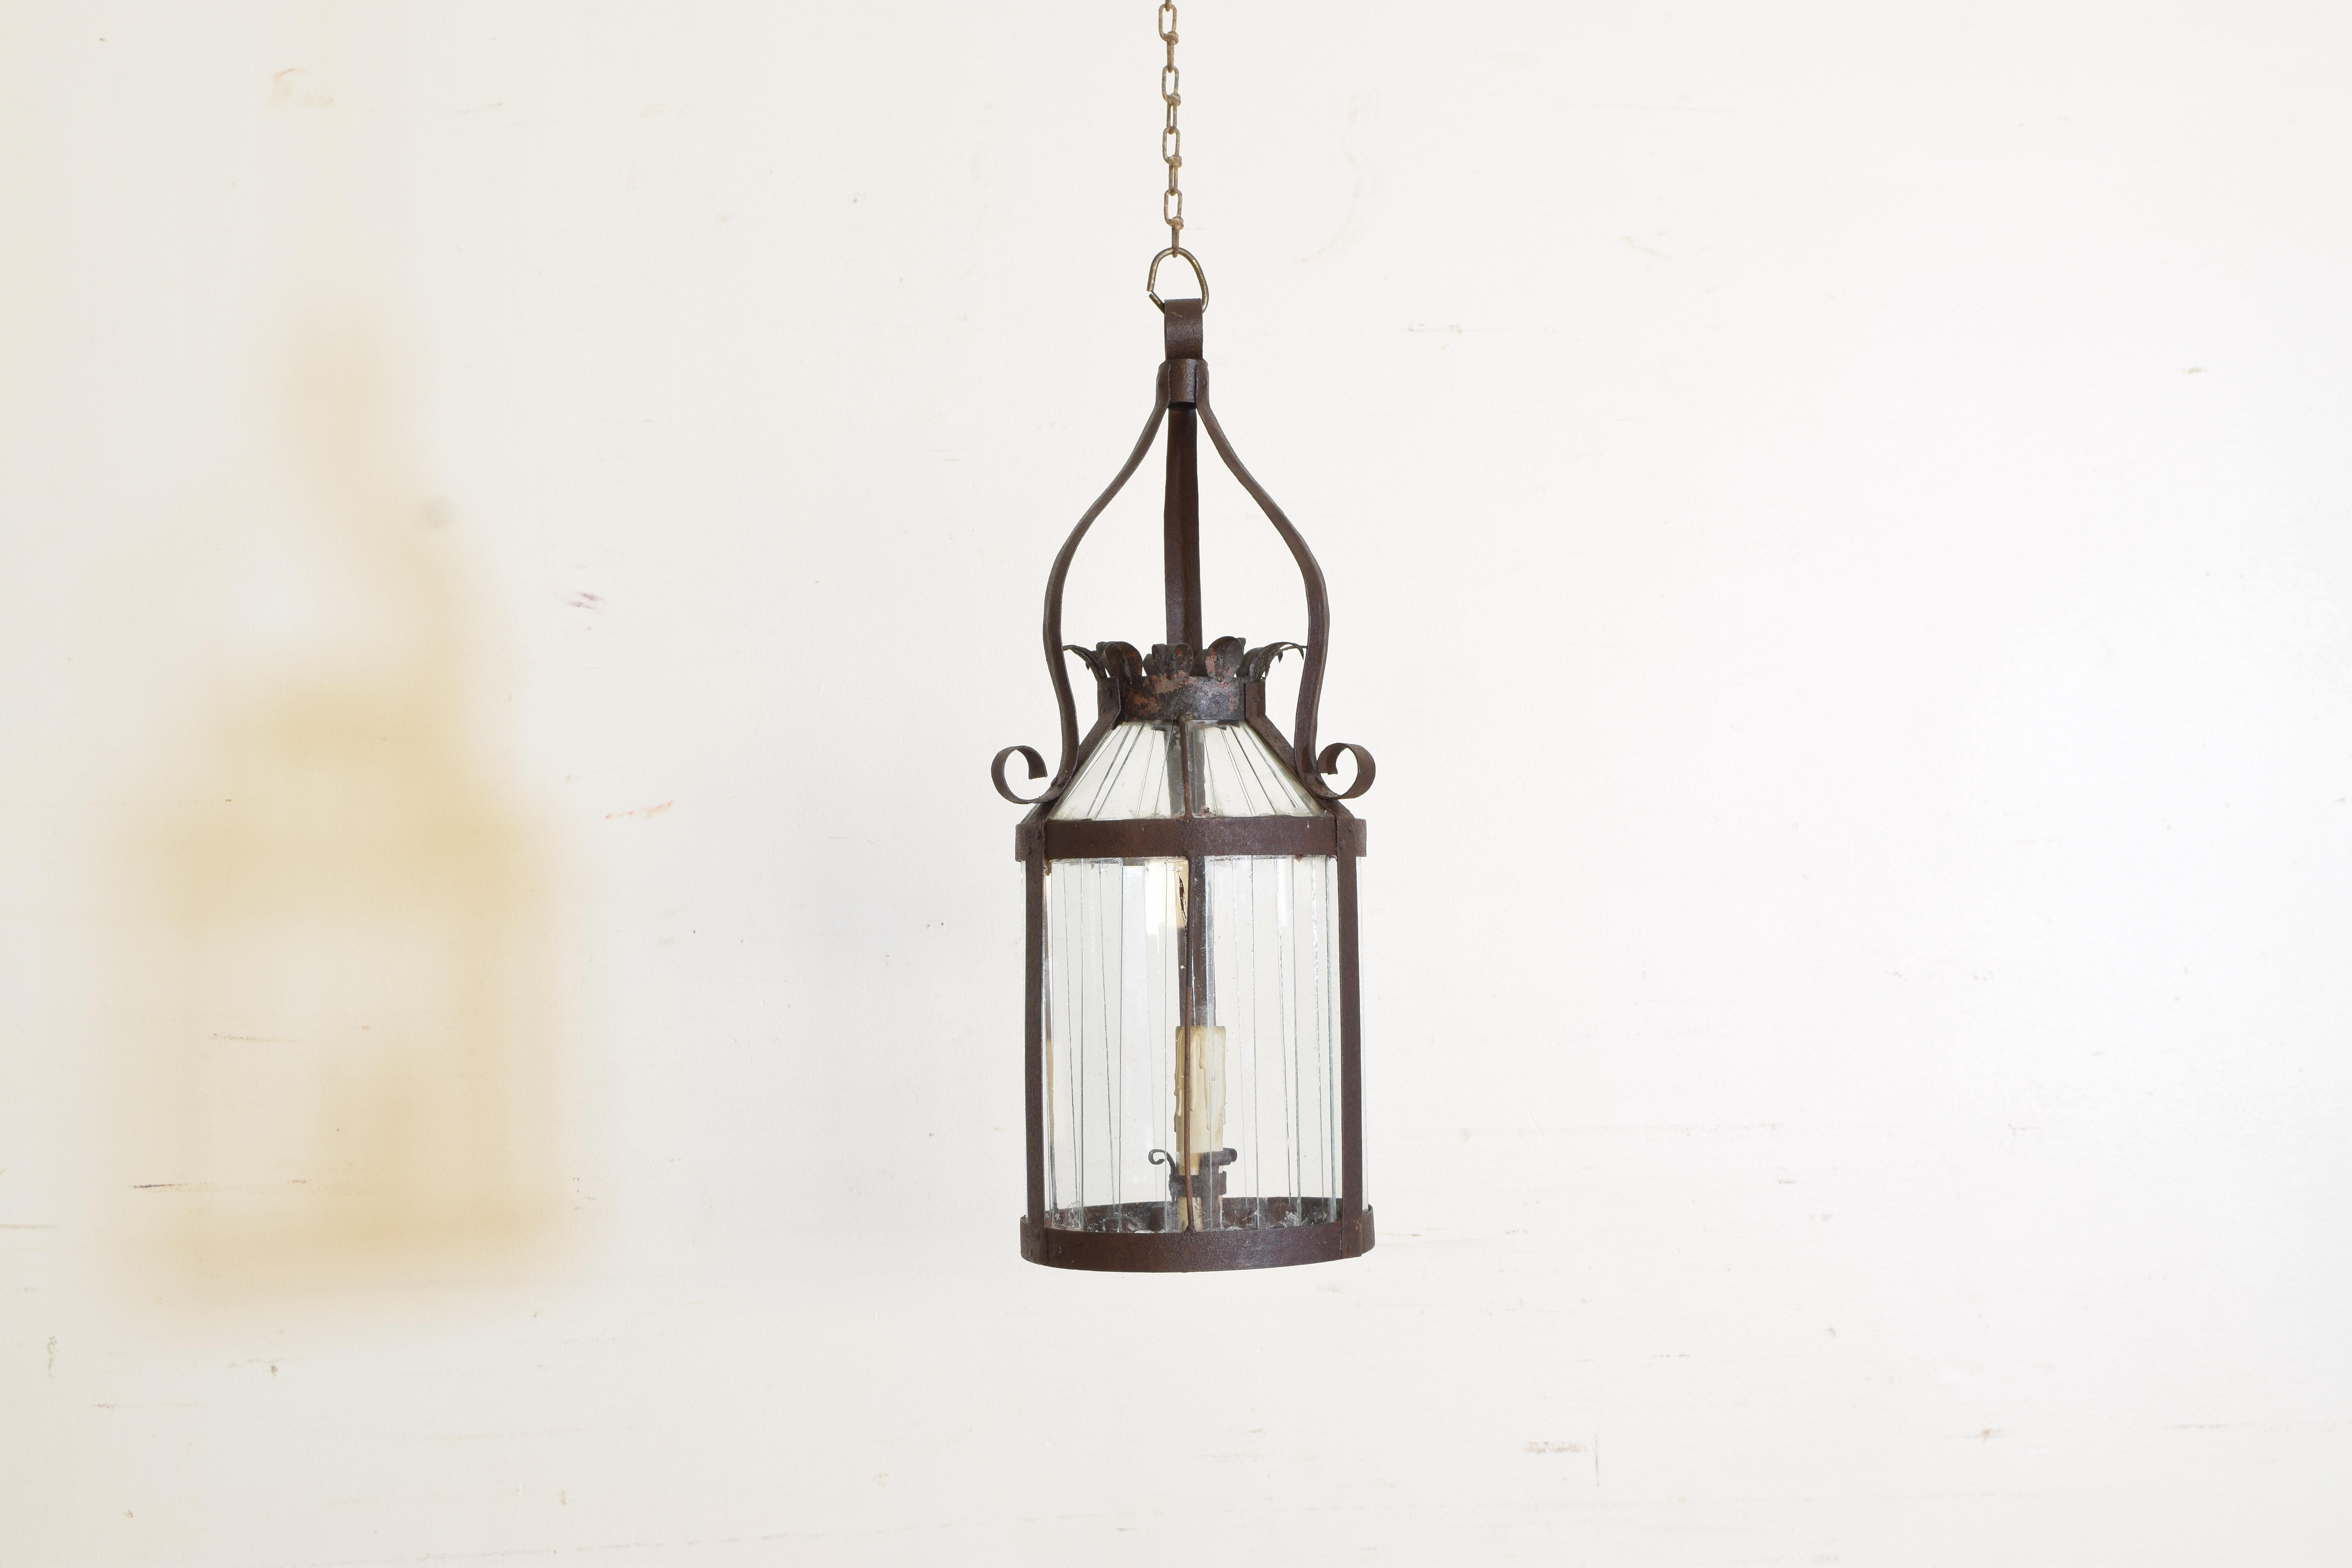 Hanging from a loop issuing three curved arms, the circular lantern with a domed open top with flared edges, the bottom of the lantern with a crossbar supporting the lone candle, the interior of the lantern fitted with vertical glass panes, late